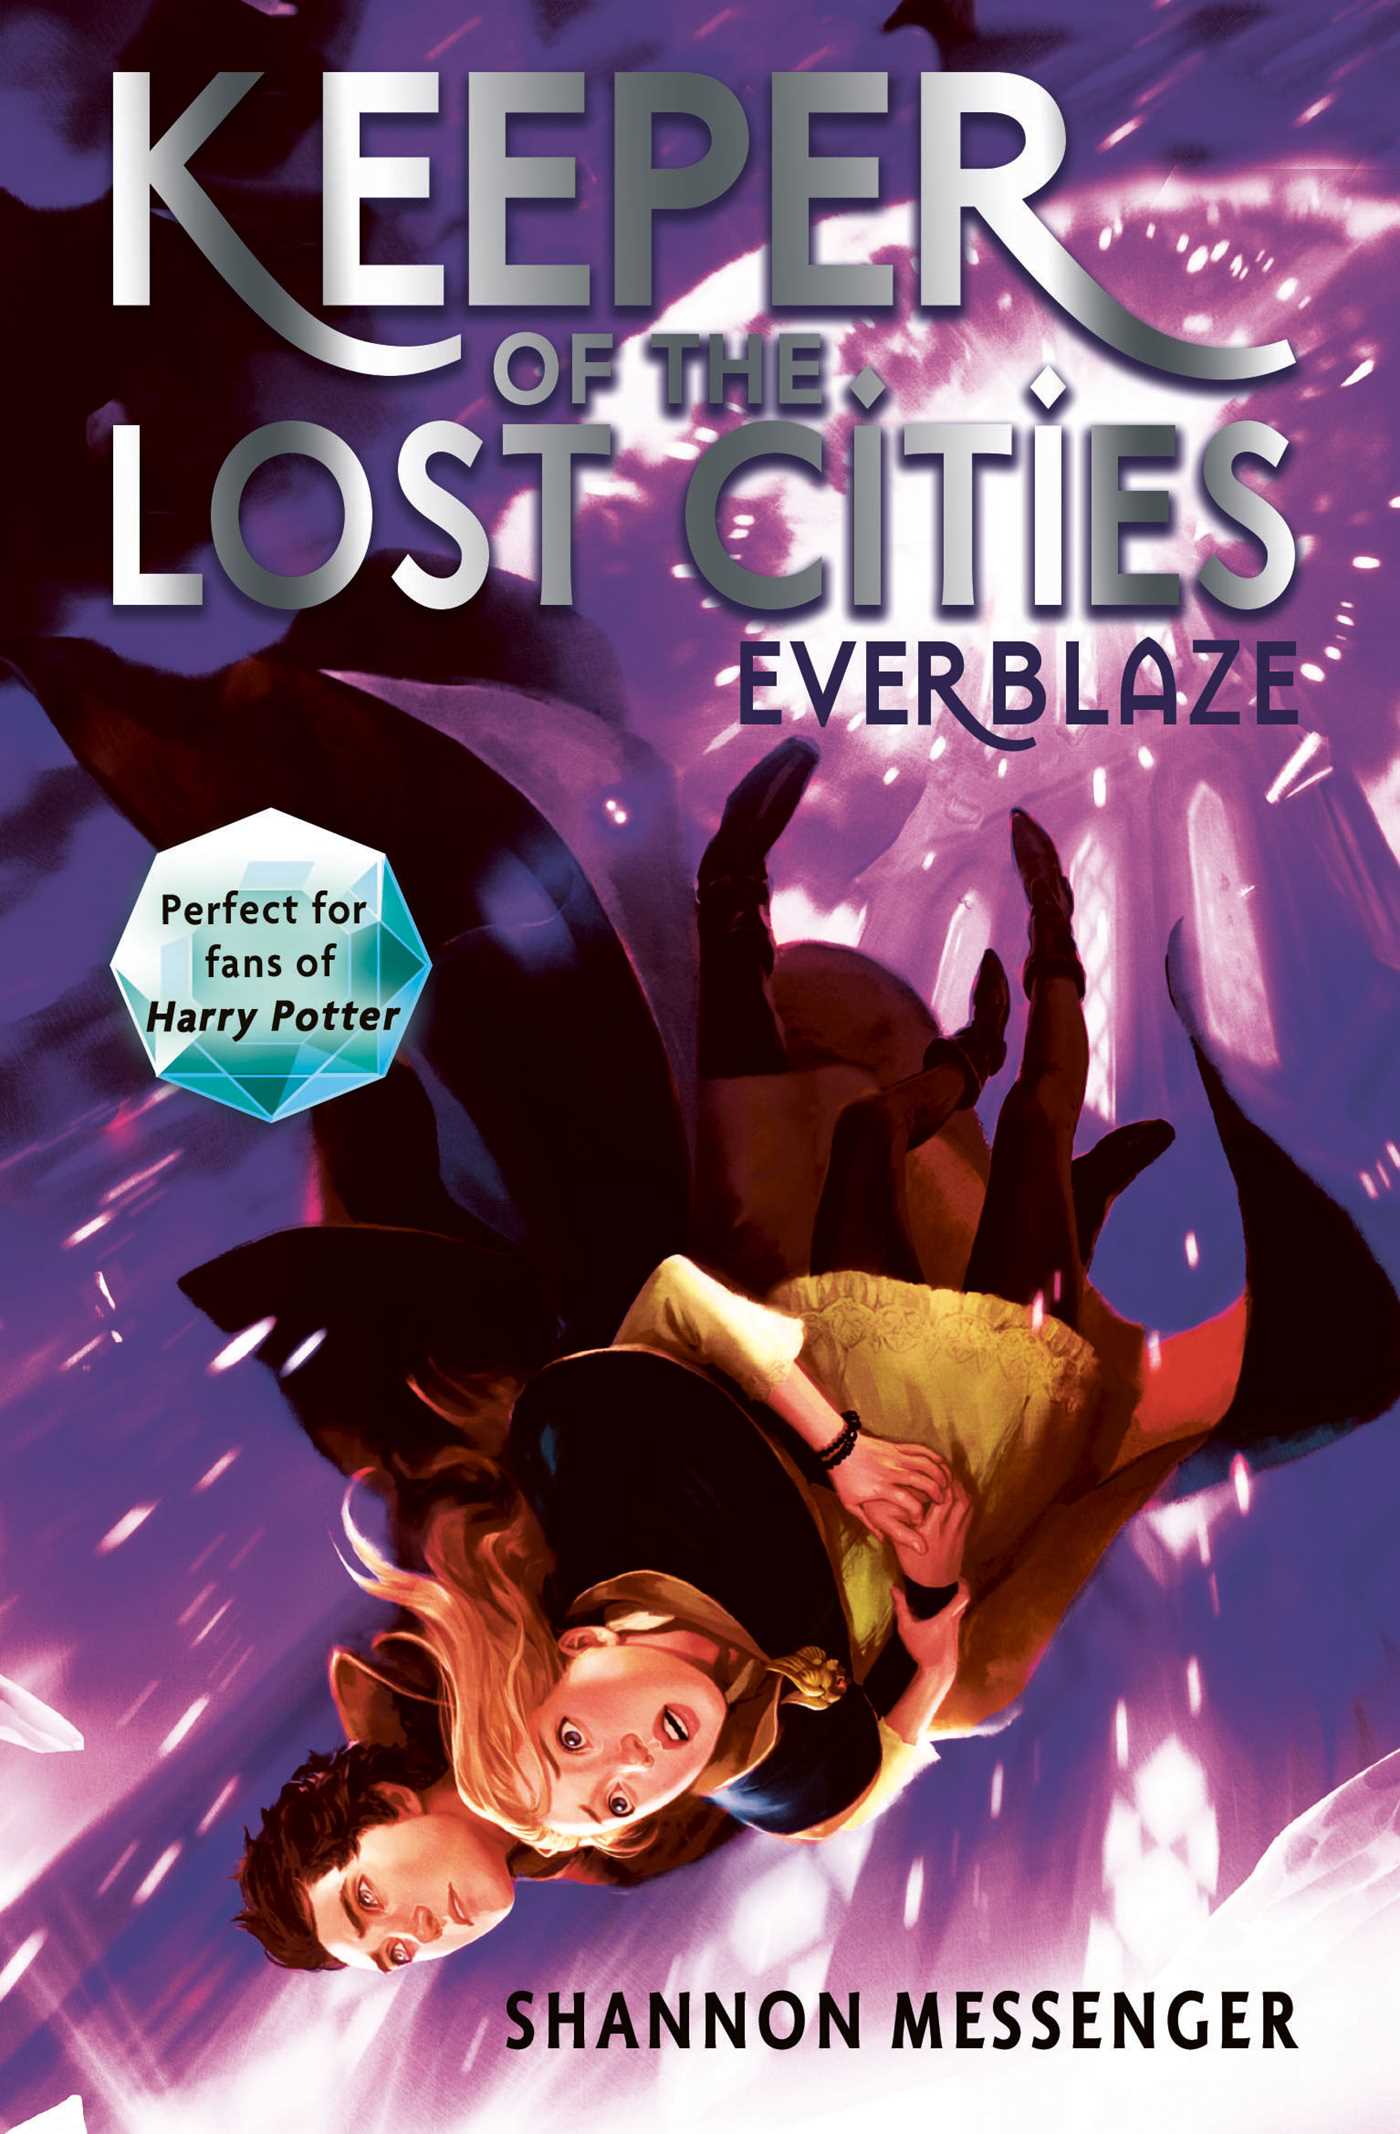 EVERBLAZE (KEEPER OF THE LOST CITIES BOOK 3)